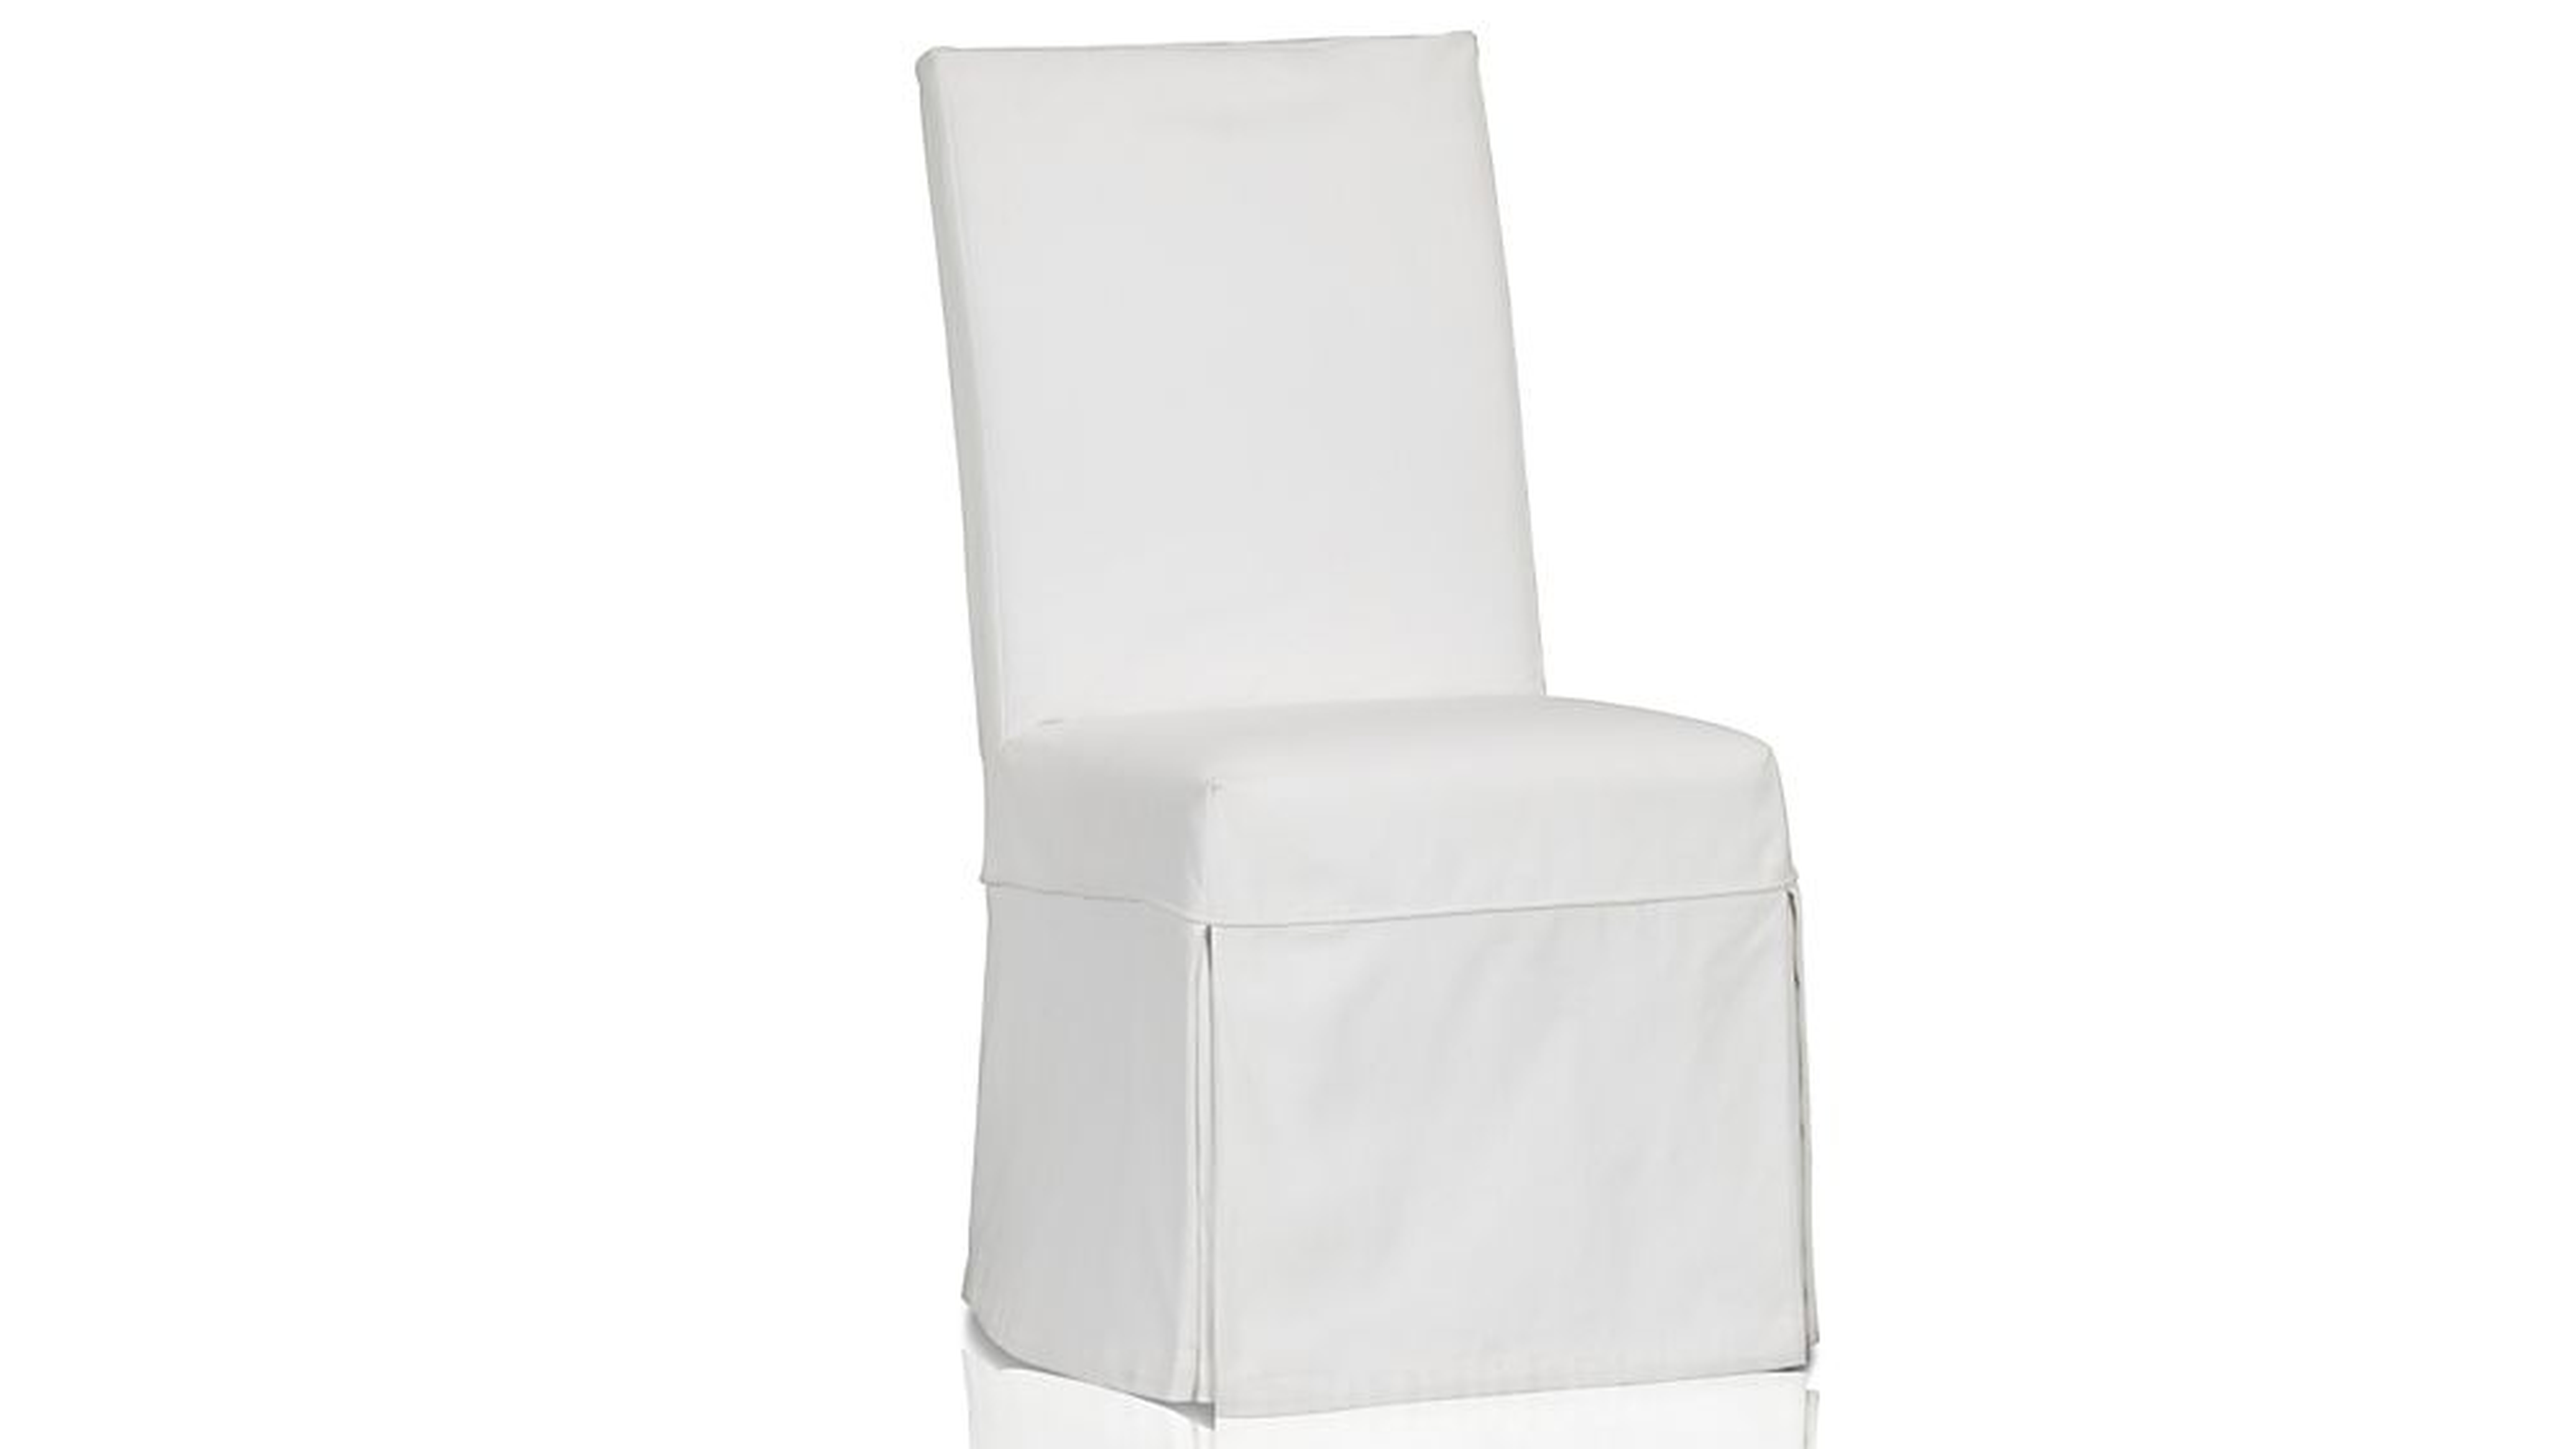 Slip White Slipcovered Dining Chair - Crate and Barrel